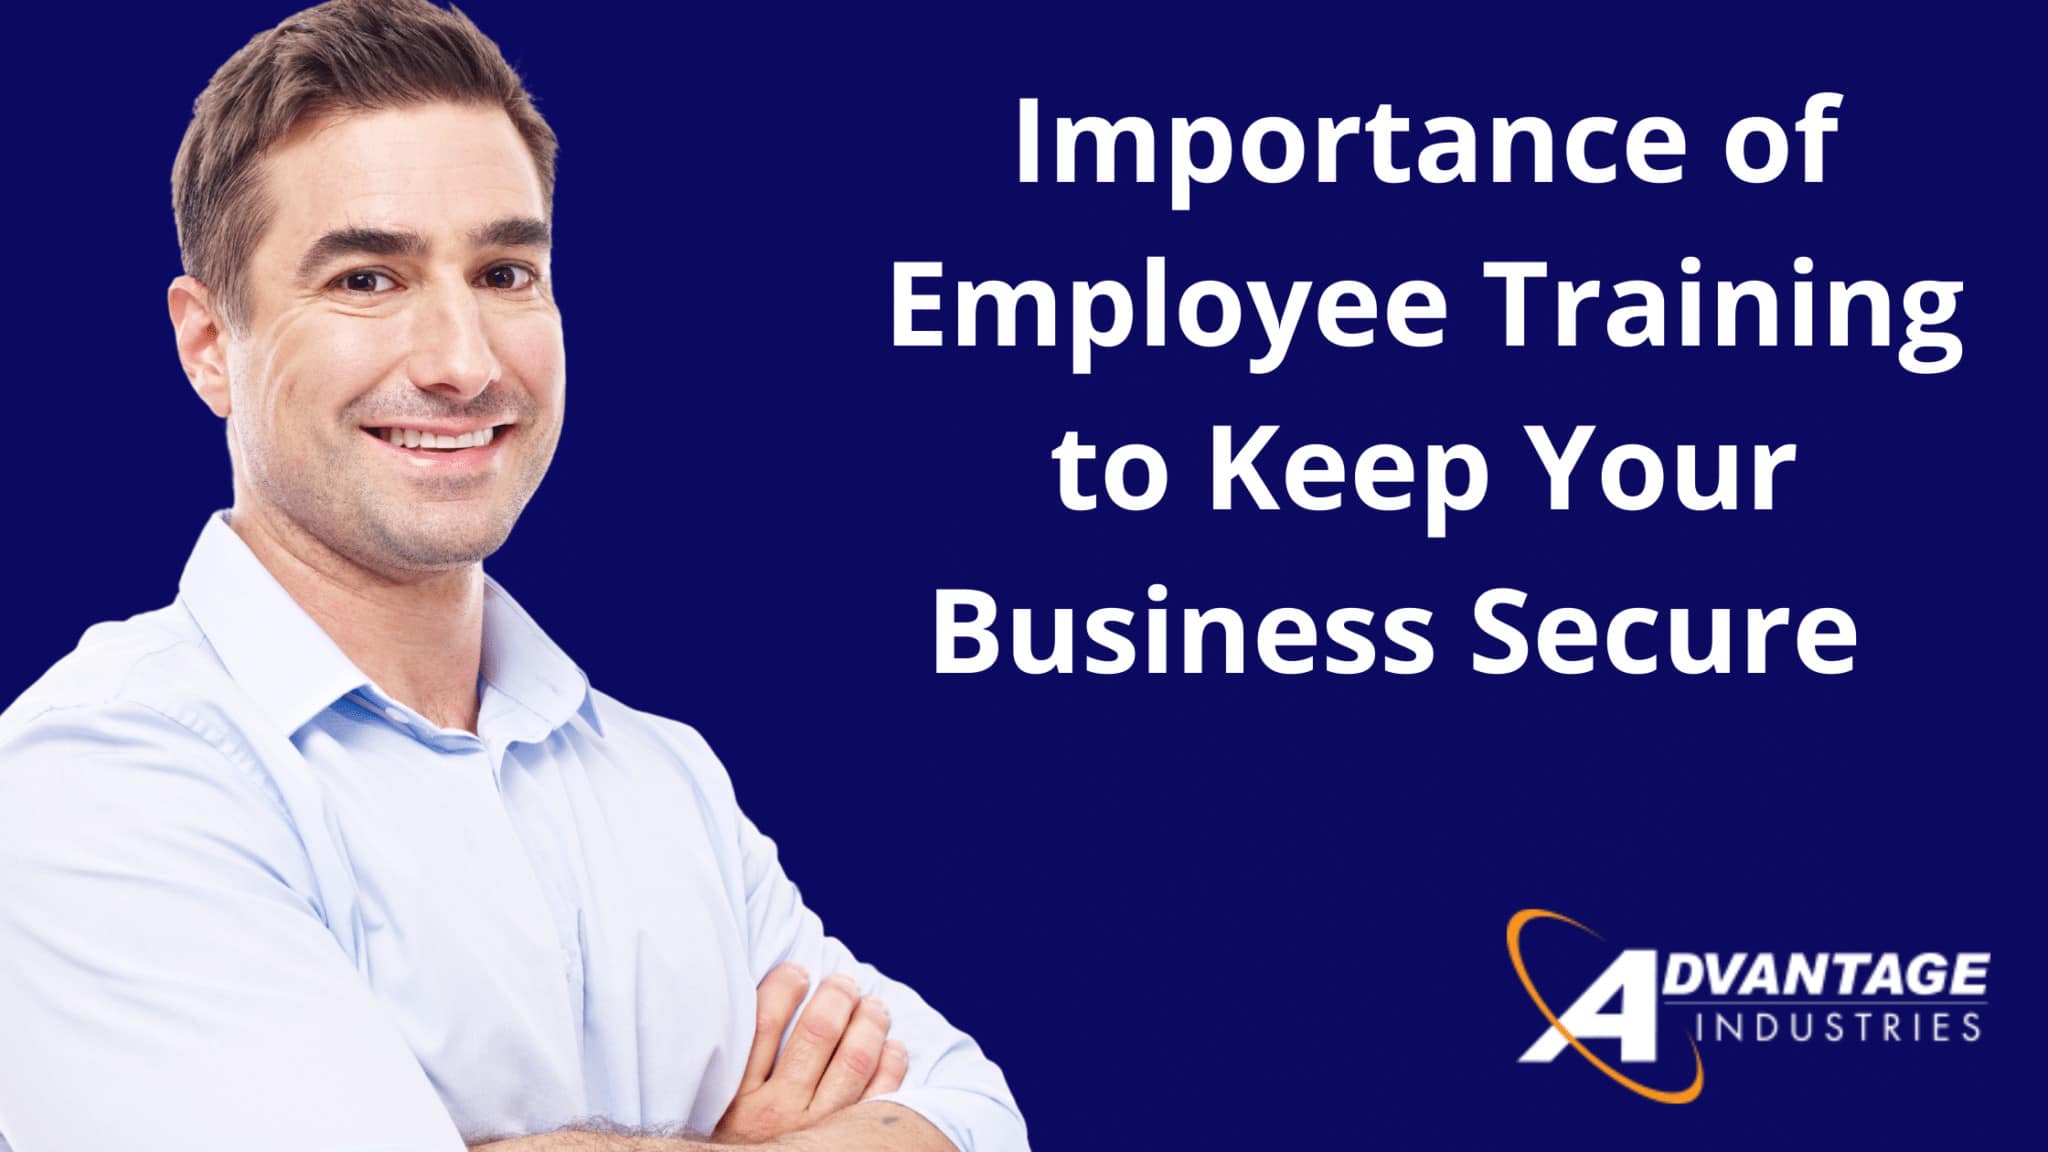 Importance of Employee Training to Keep Your Business Secure